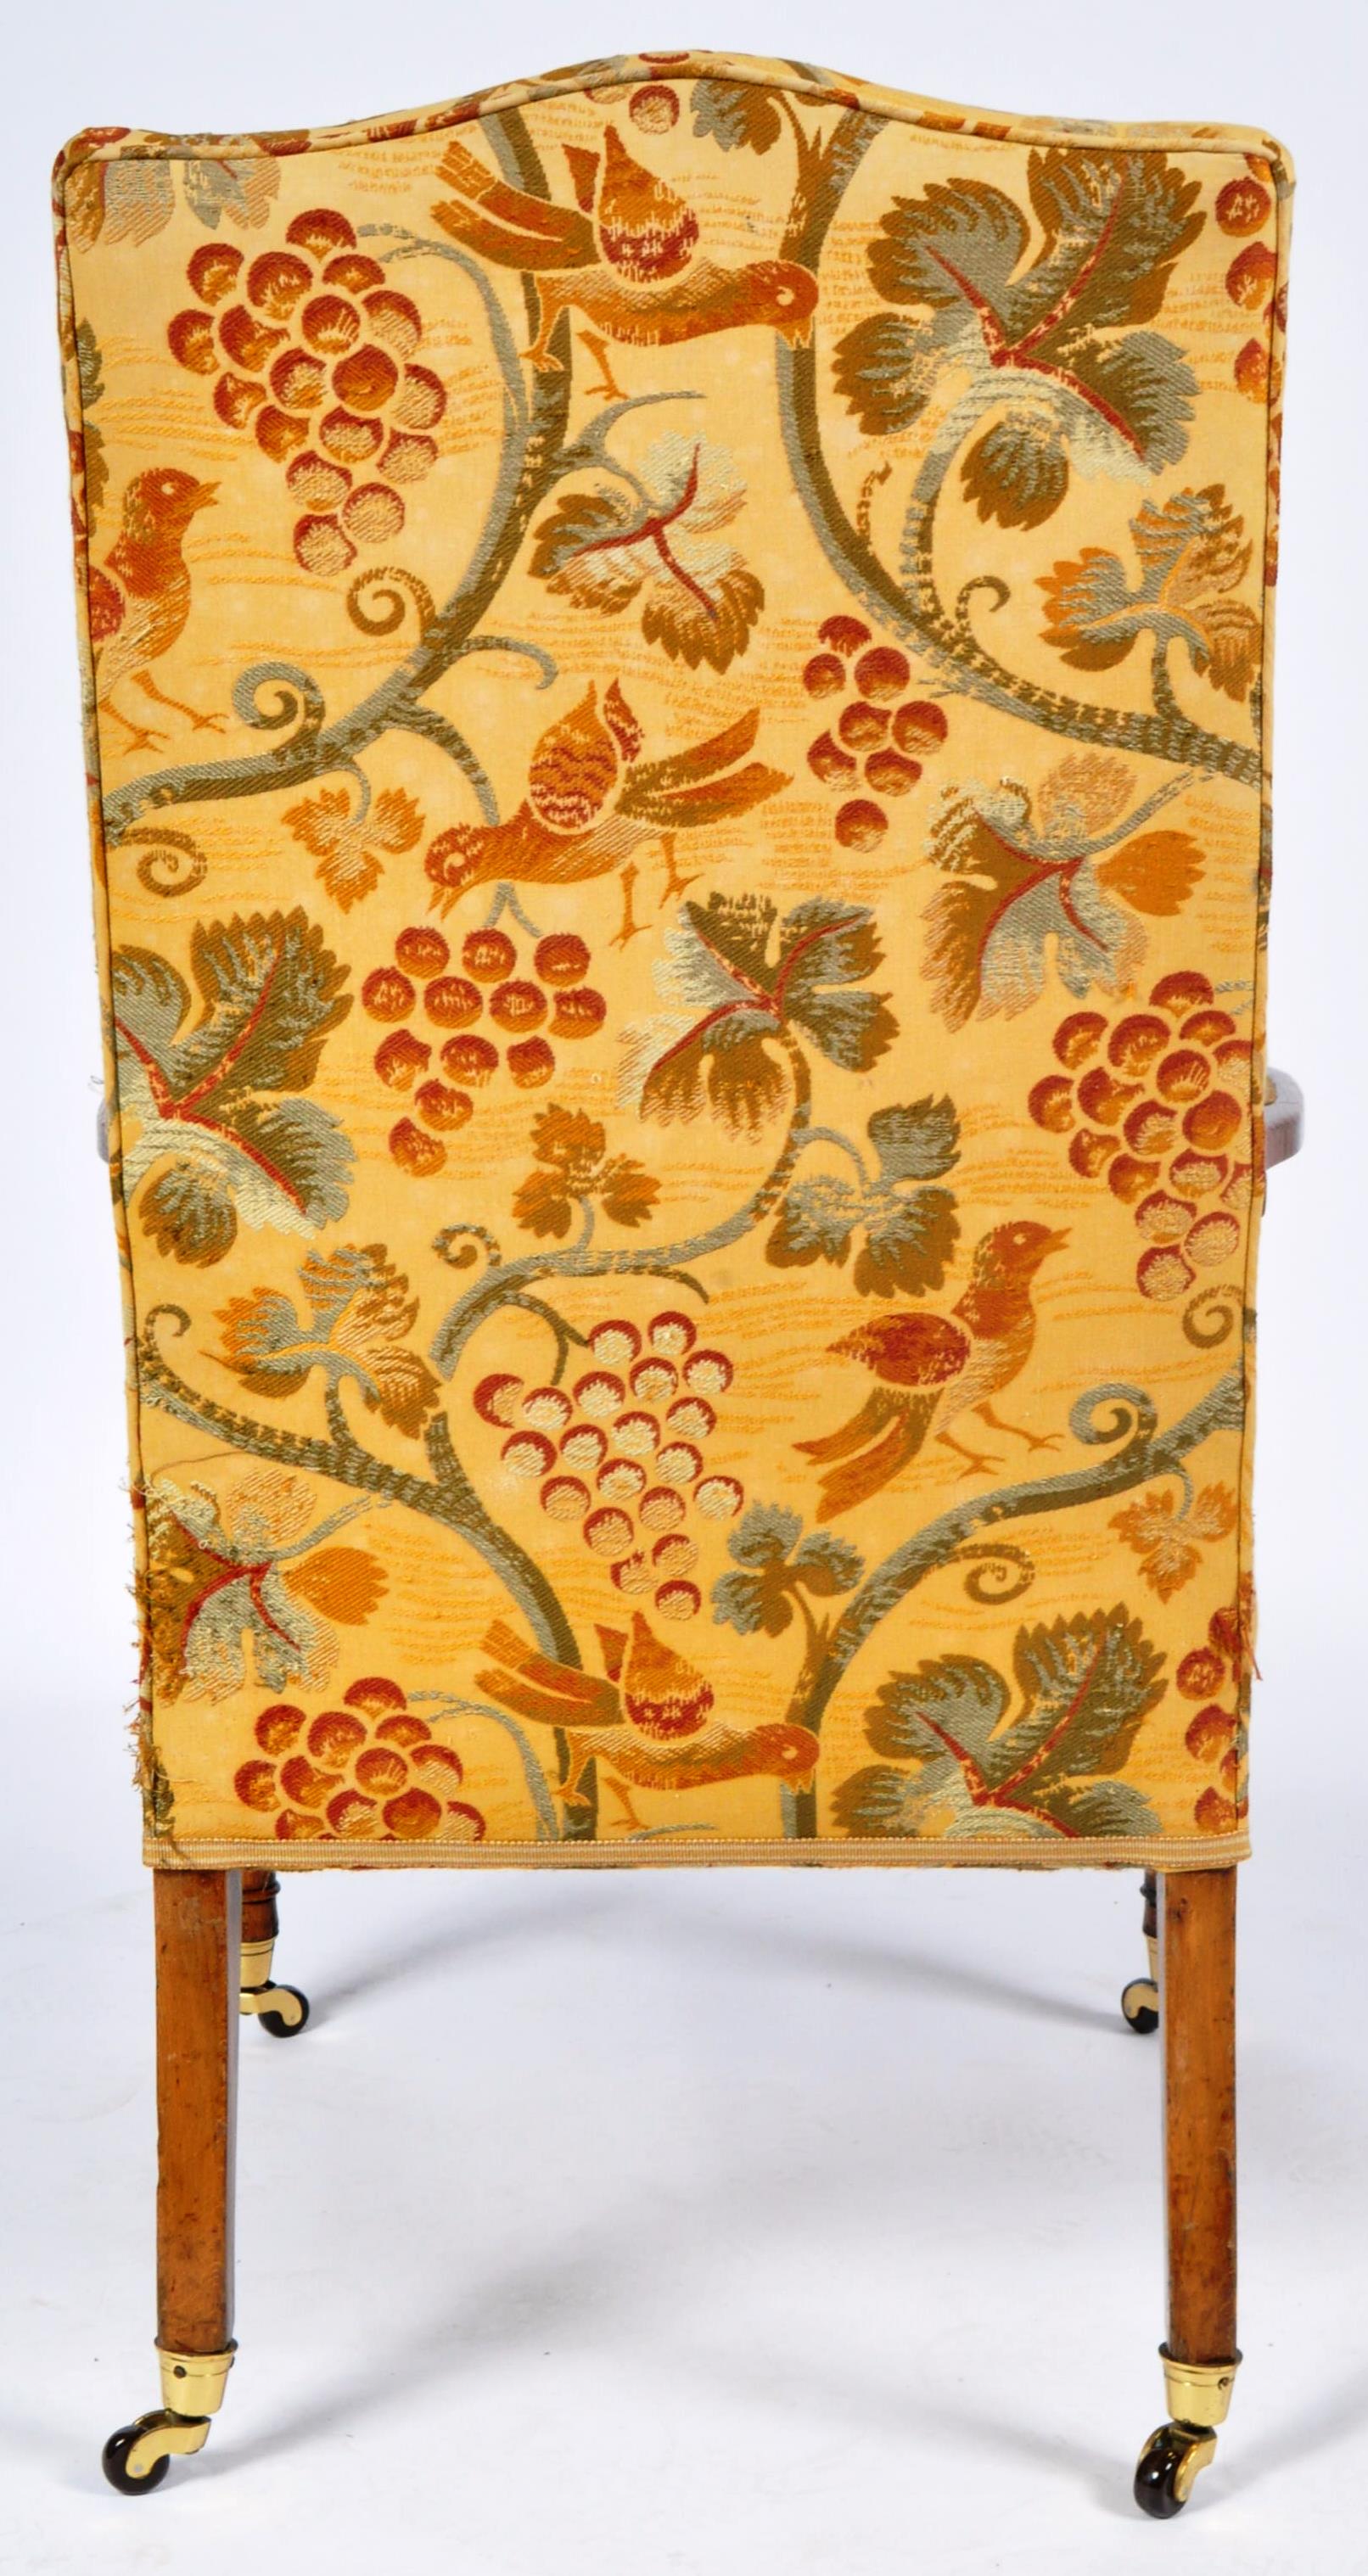 20TH CENTURY ARTS & CRAFTS ARMCHAIR IN THE MANNER OF SHAPLAND & PETTER - Image 7 of 8